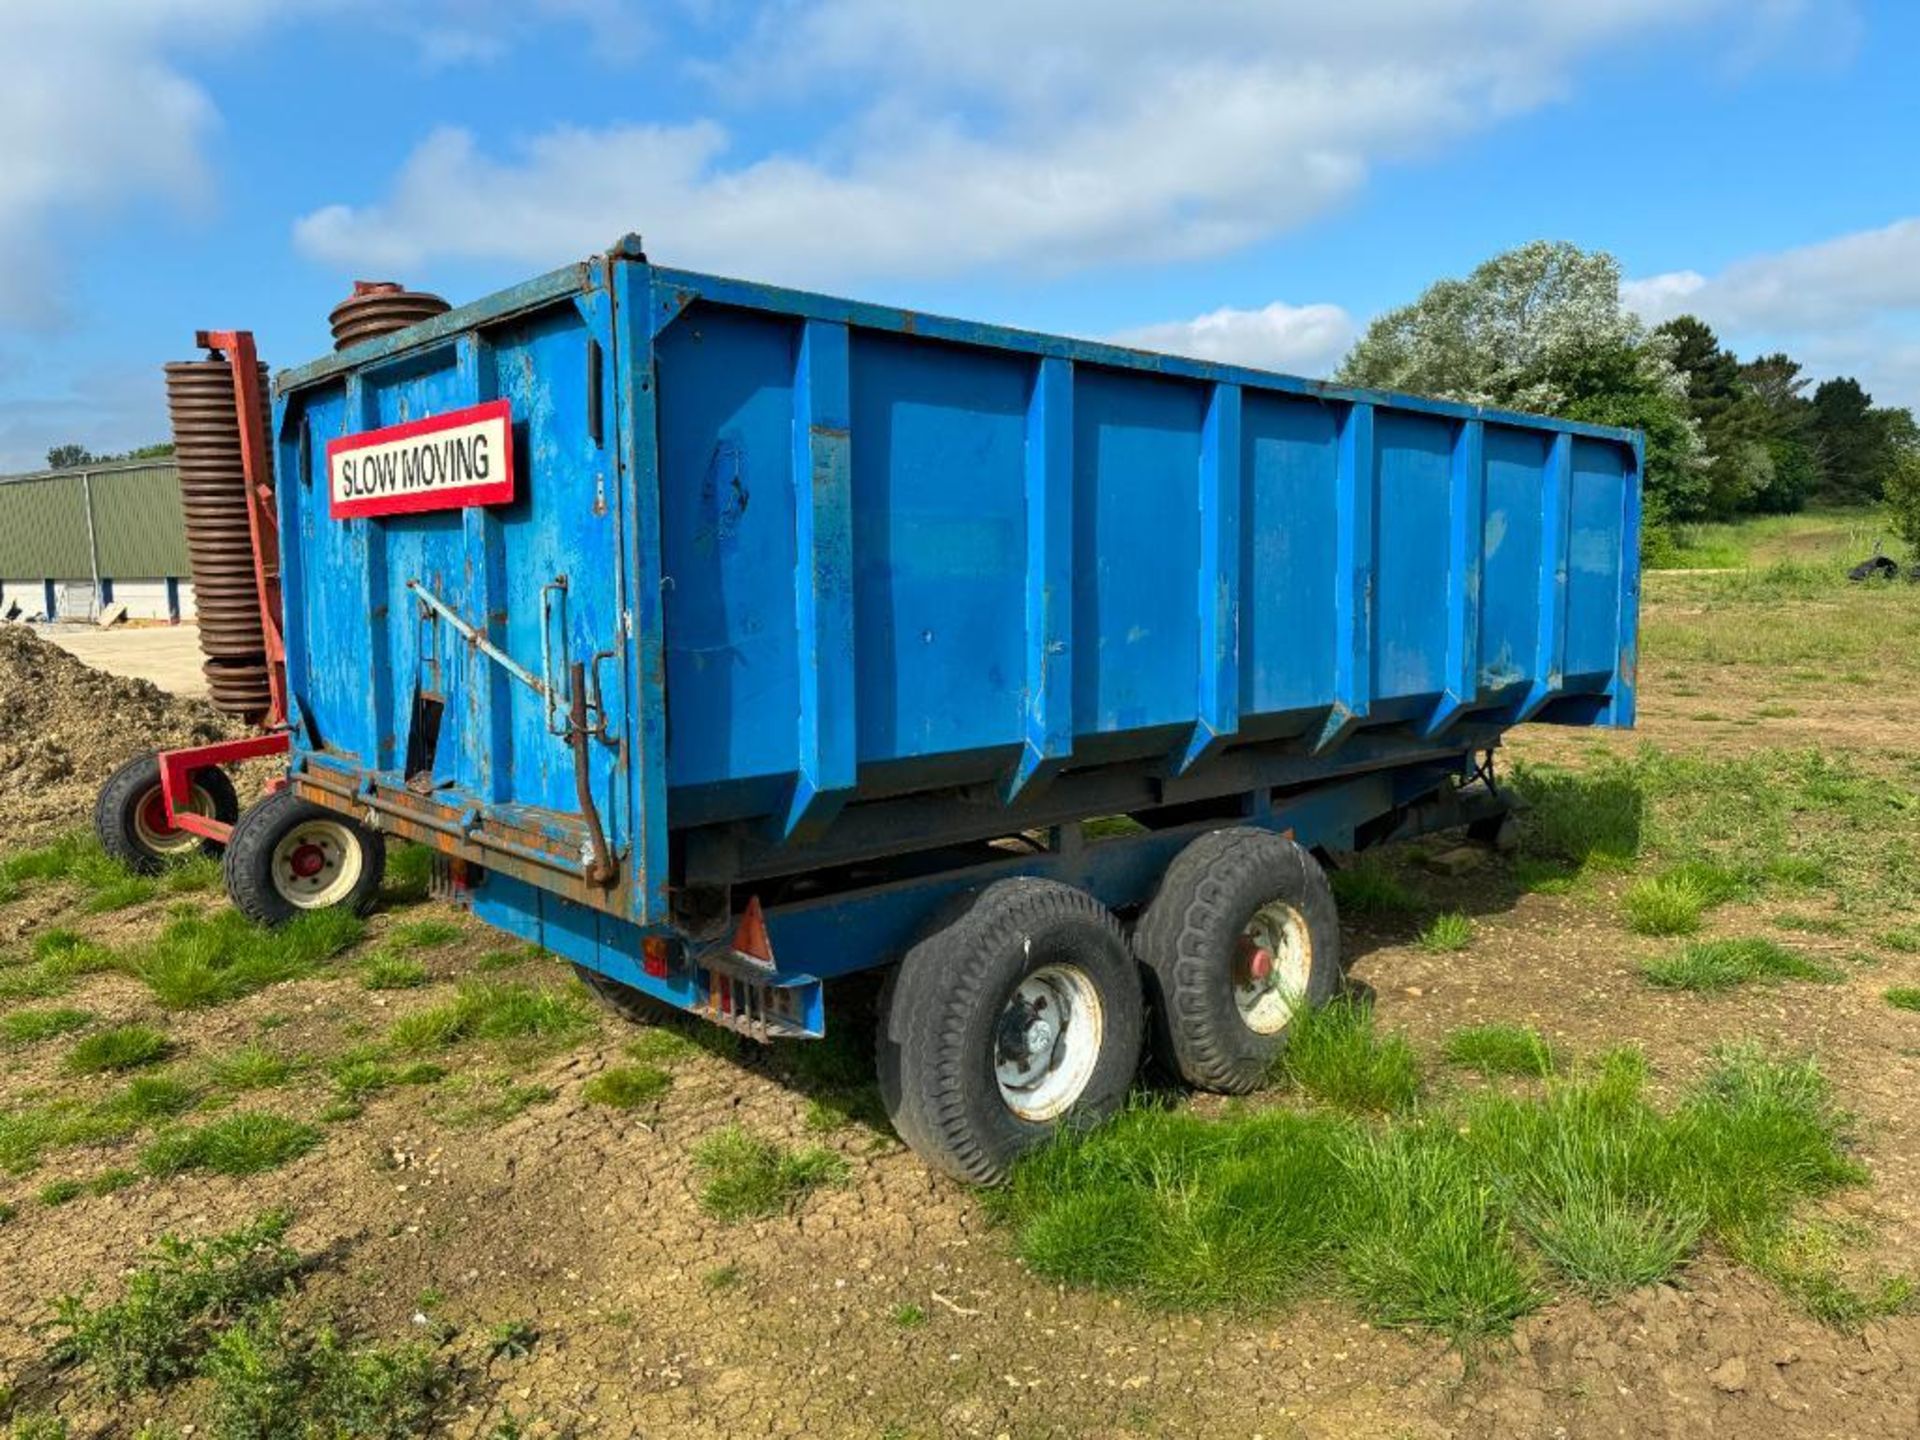 1978 AS Marston F10 10t twin axle grain trailer with manual tailgate and grain chute. Serial No: 418 - Image 4 of 4